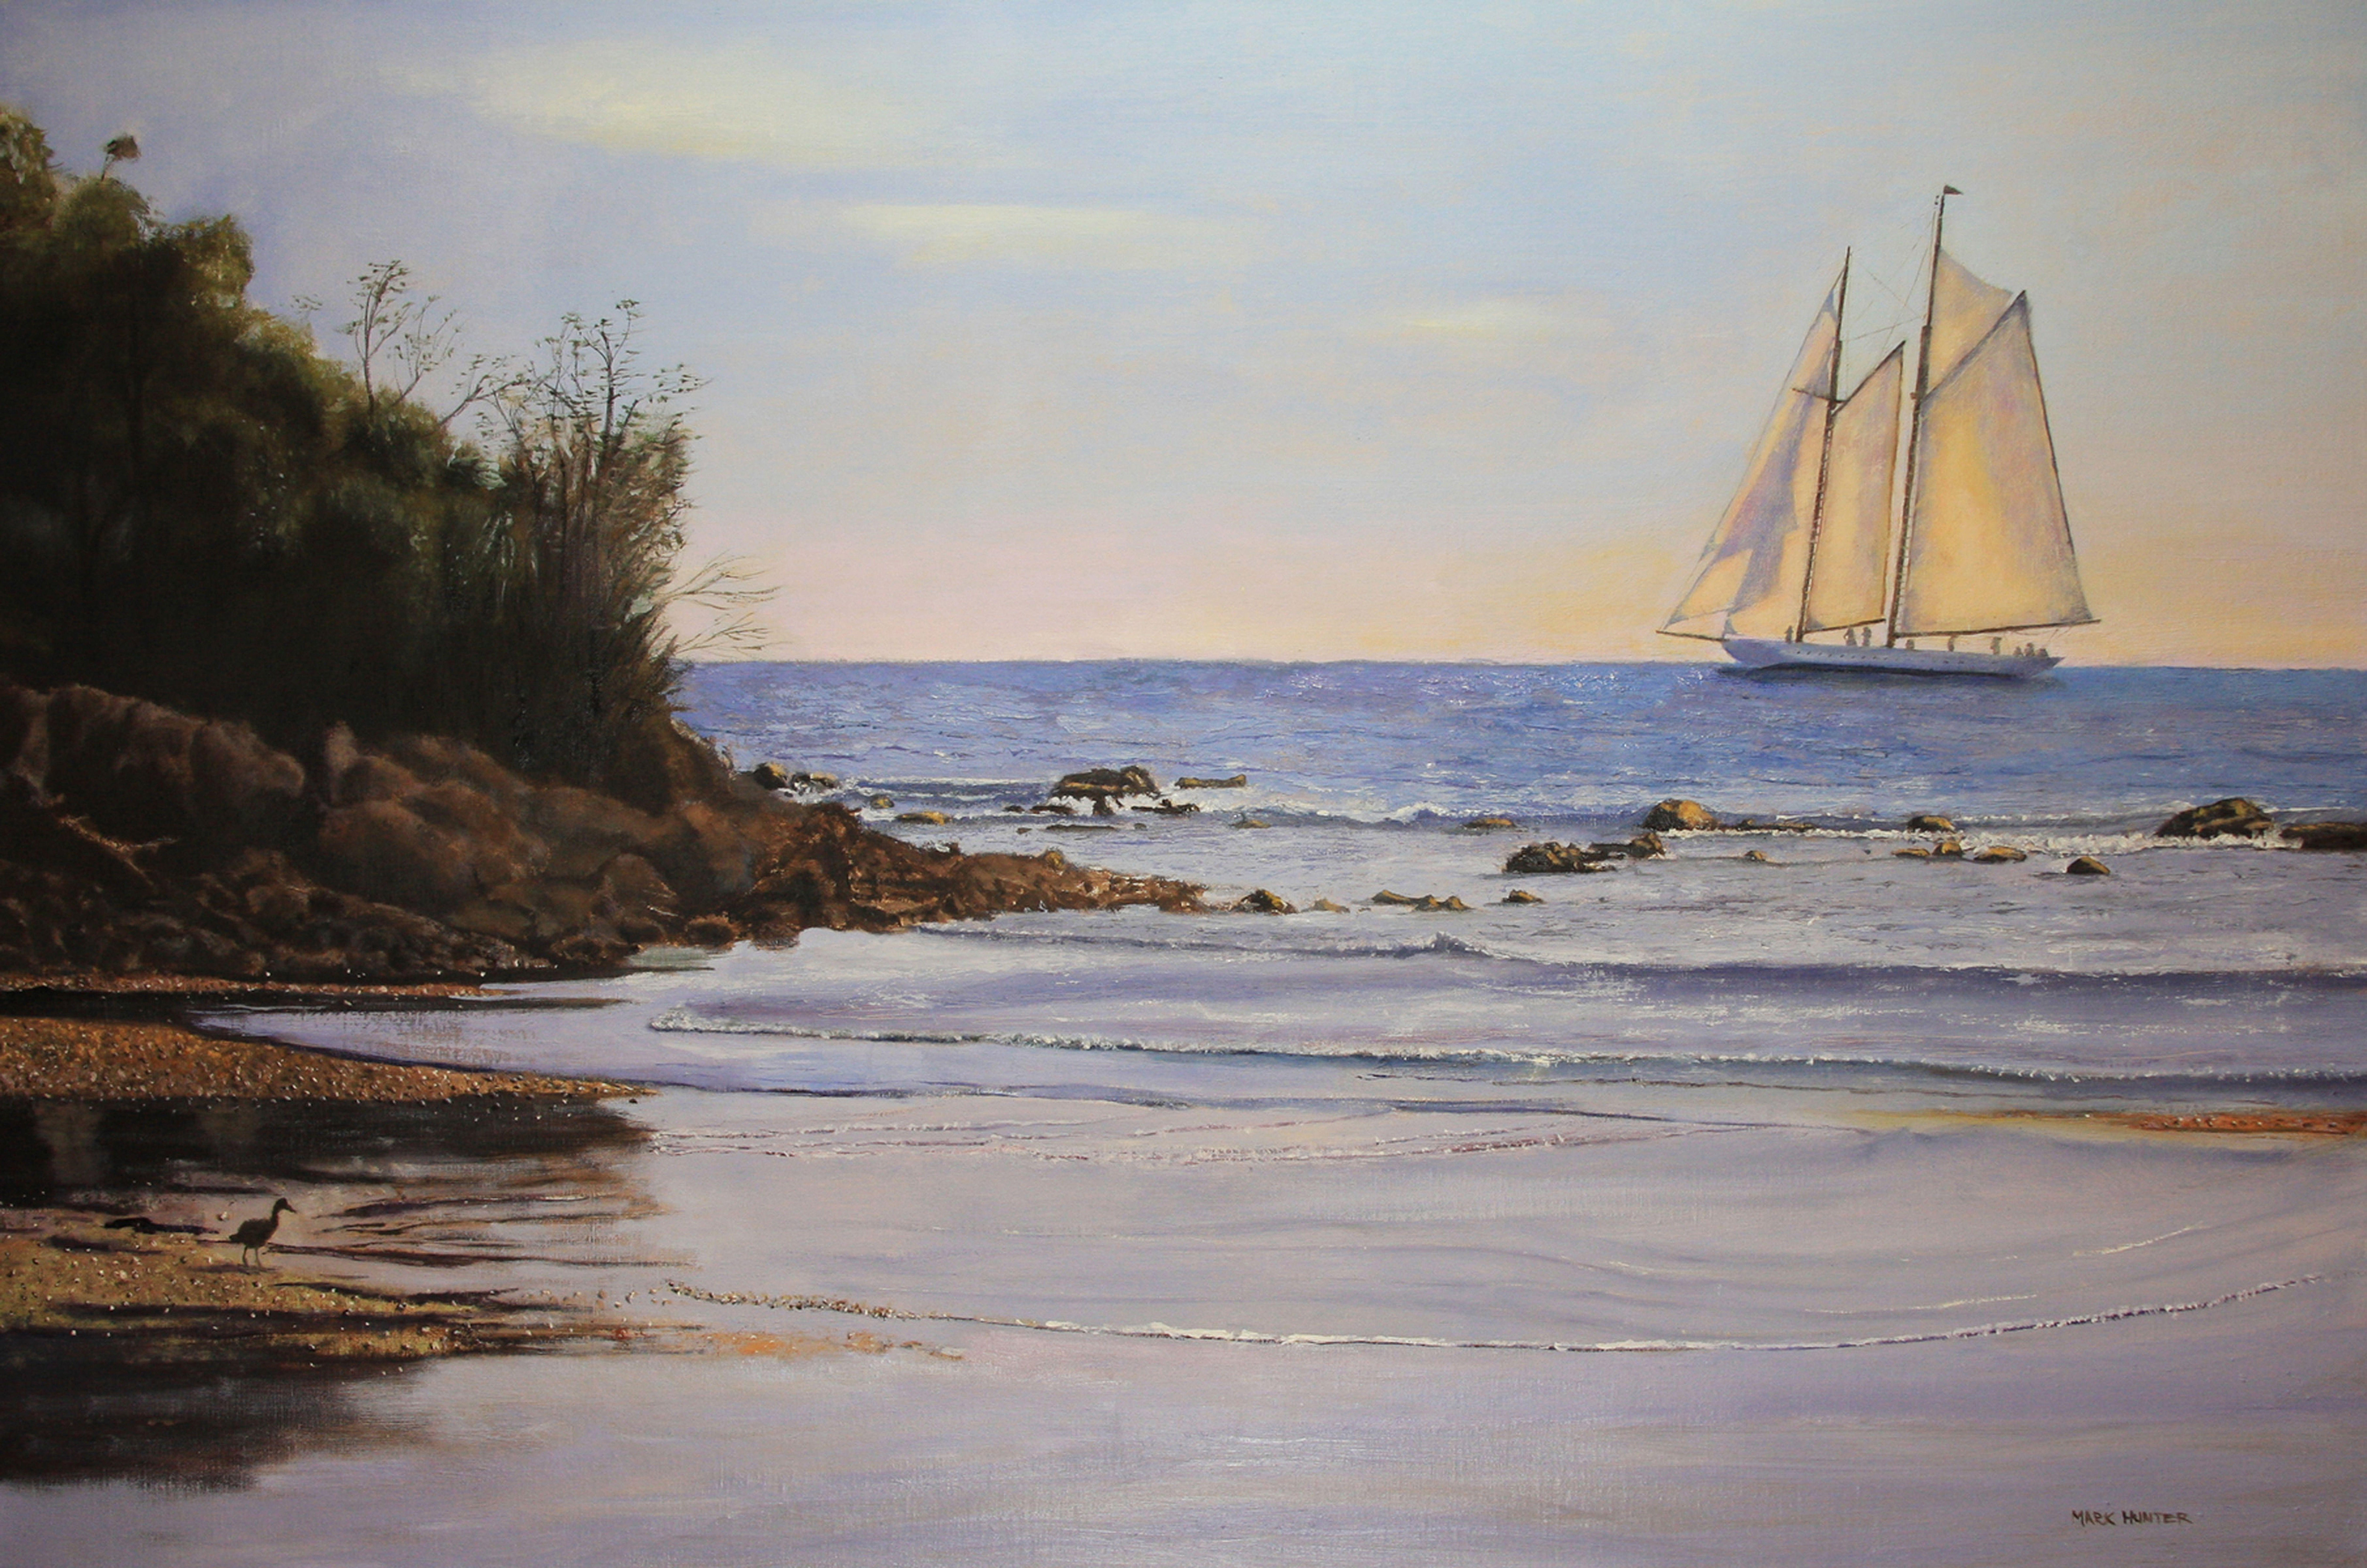 A large schooner sails in the fading light off Falmouth Harbour during the annual Antigua Classic Regatta. :: Painting :: Realism :: This piece comes with an official certificate of authenticity signed by the artist :: Ready to Hang: No :: Signed: